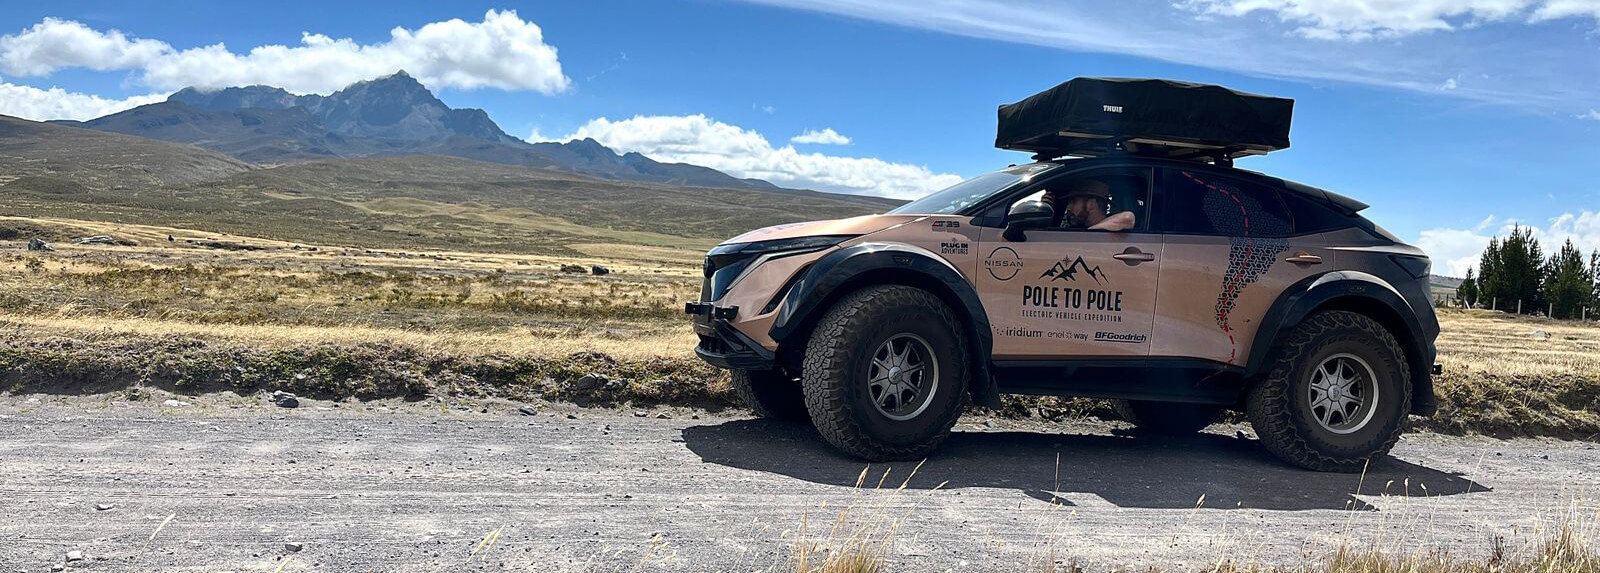 Nissan Pole to Pole electric vehicle expedition reaches the South Pole video-banner